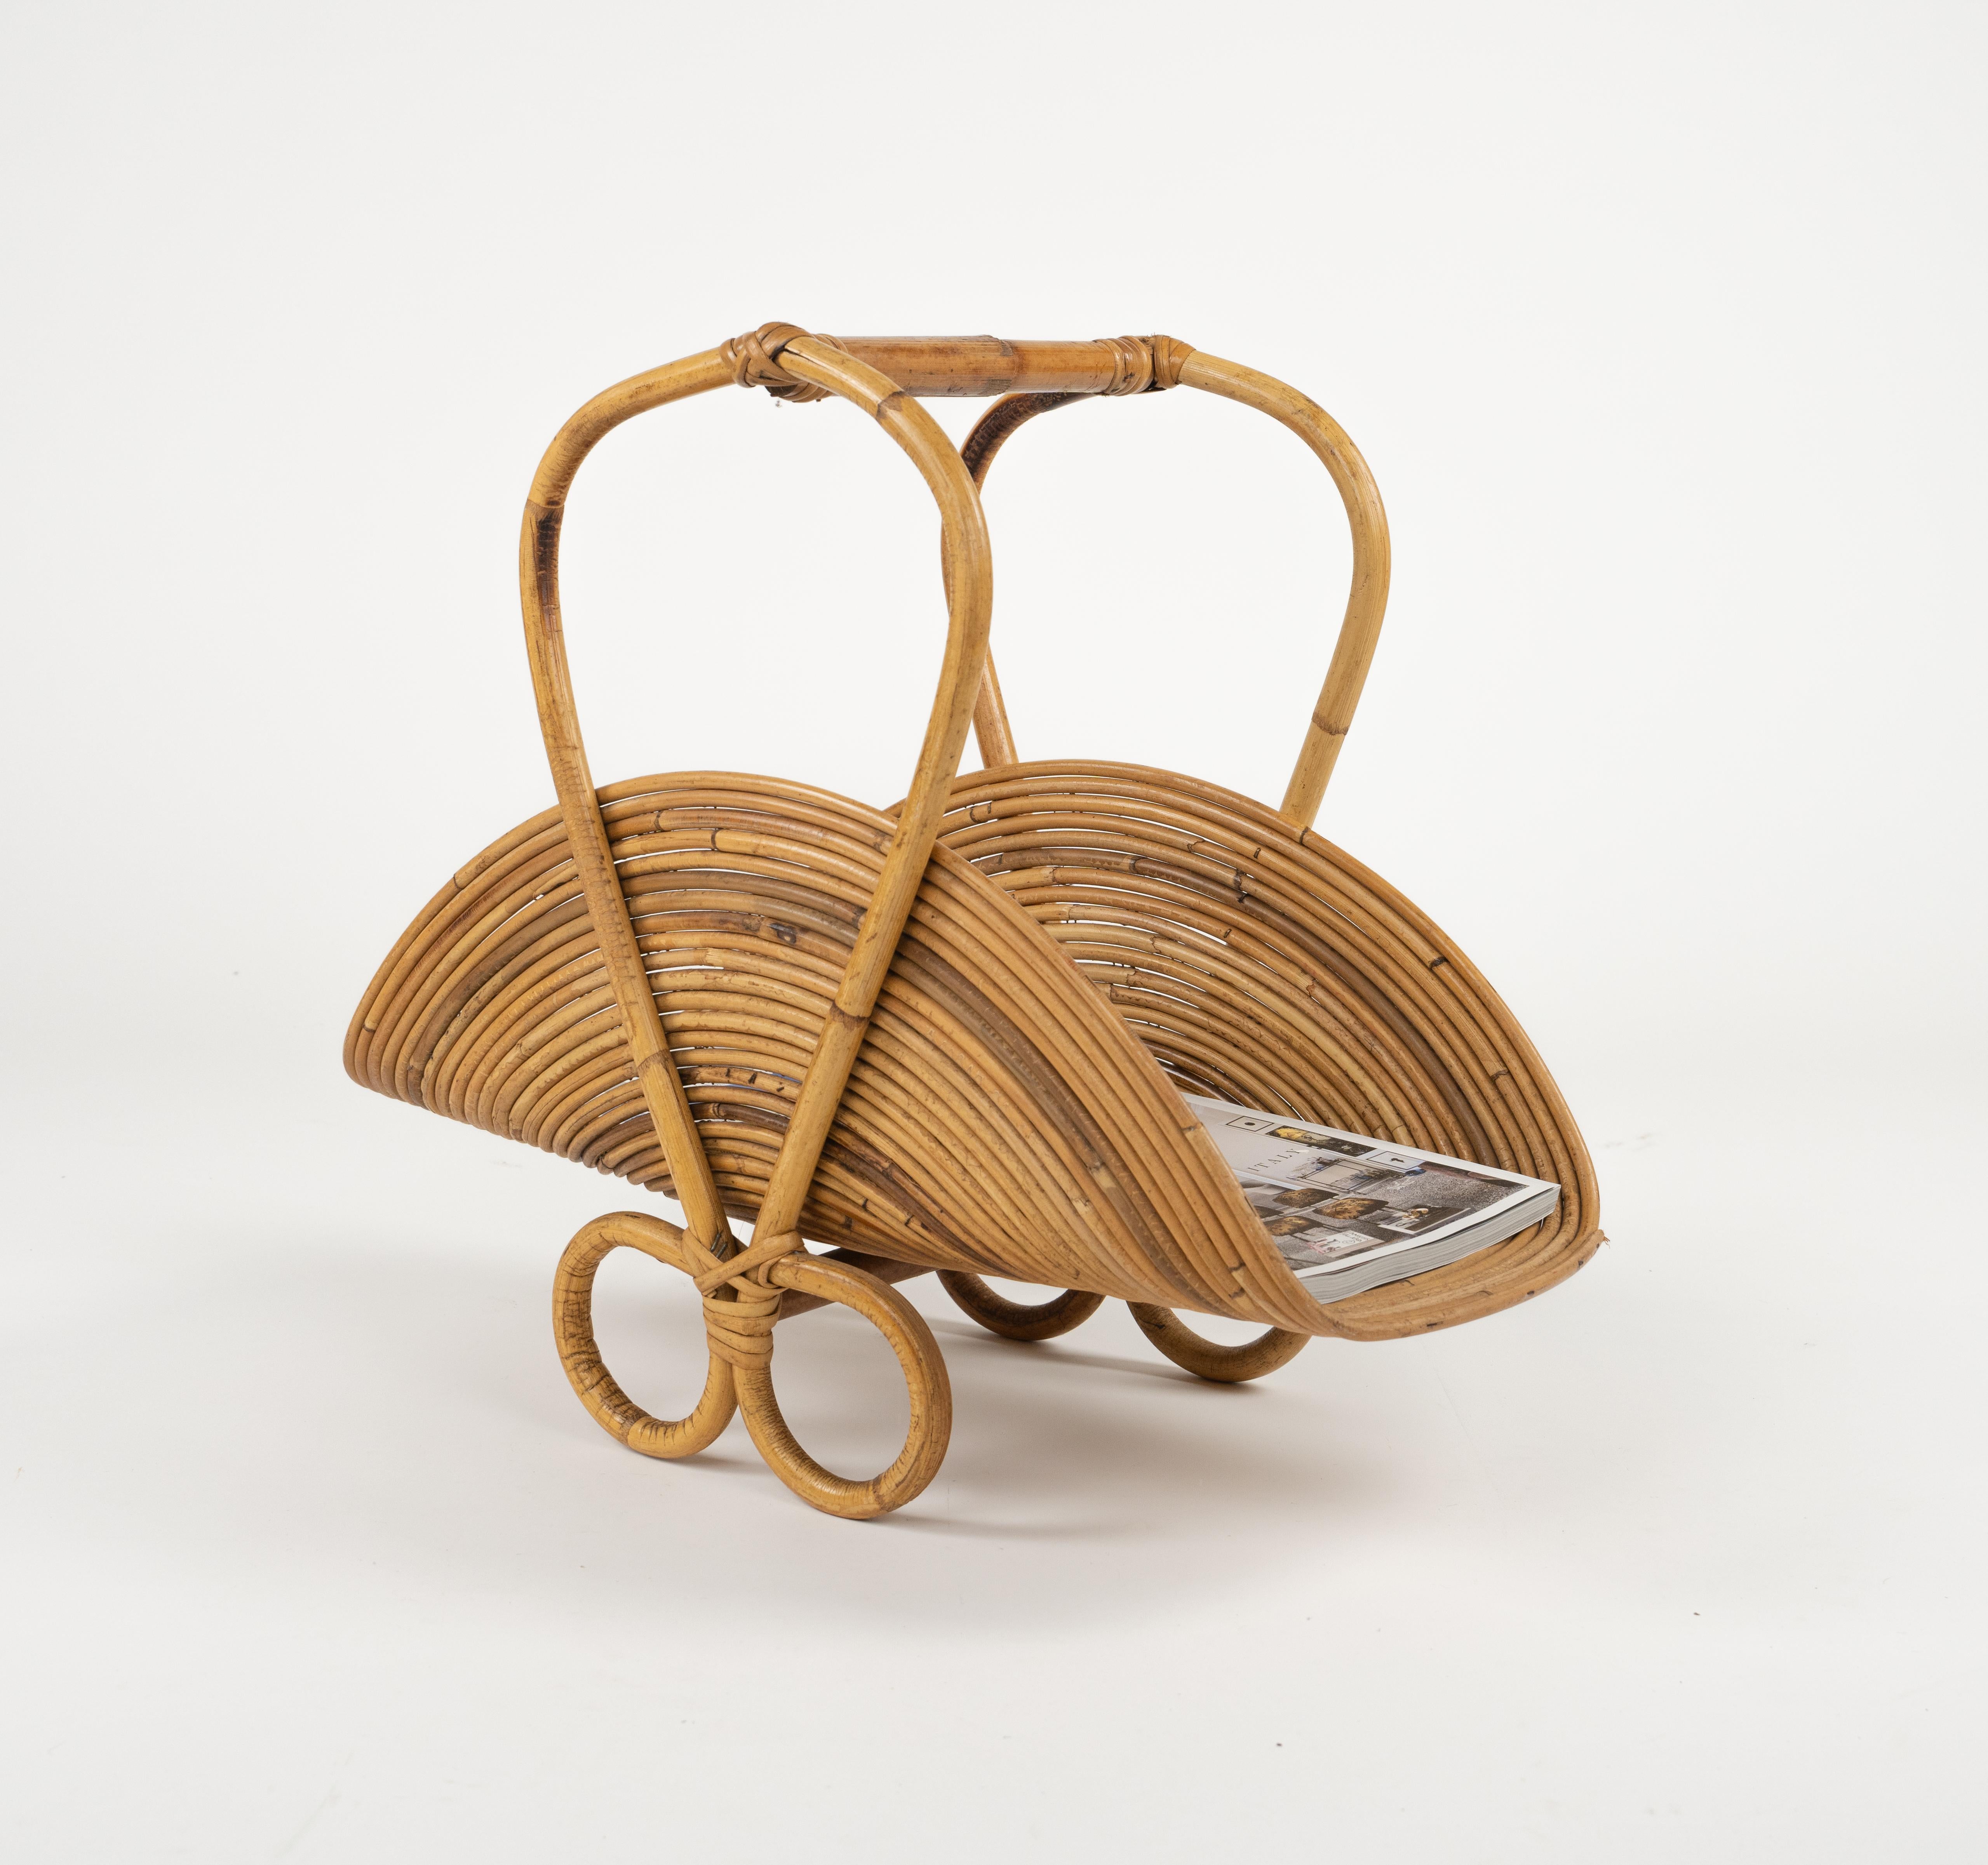 Midcentury Bamboo and Rattan Magazine Rack Vivai Del Sud Style, Italy 1960s For Sale 5